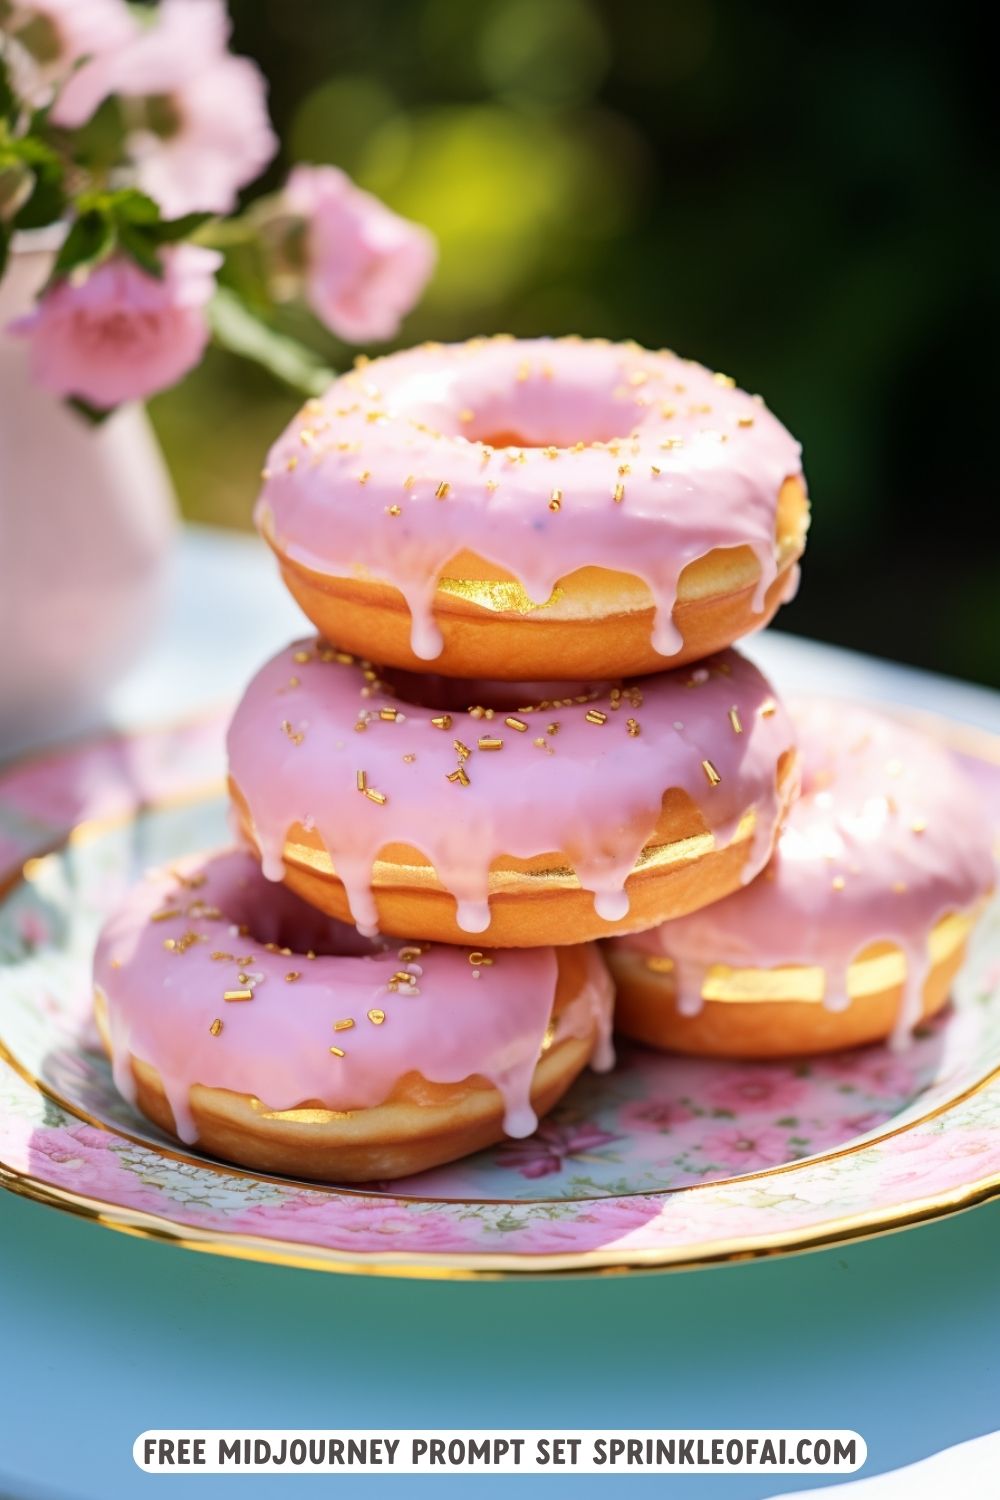 Donut Midjourney Prompts - 5 Free Food Photography Midjourney Prompts